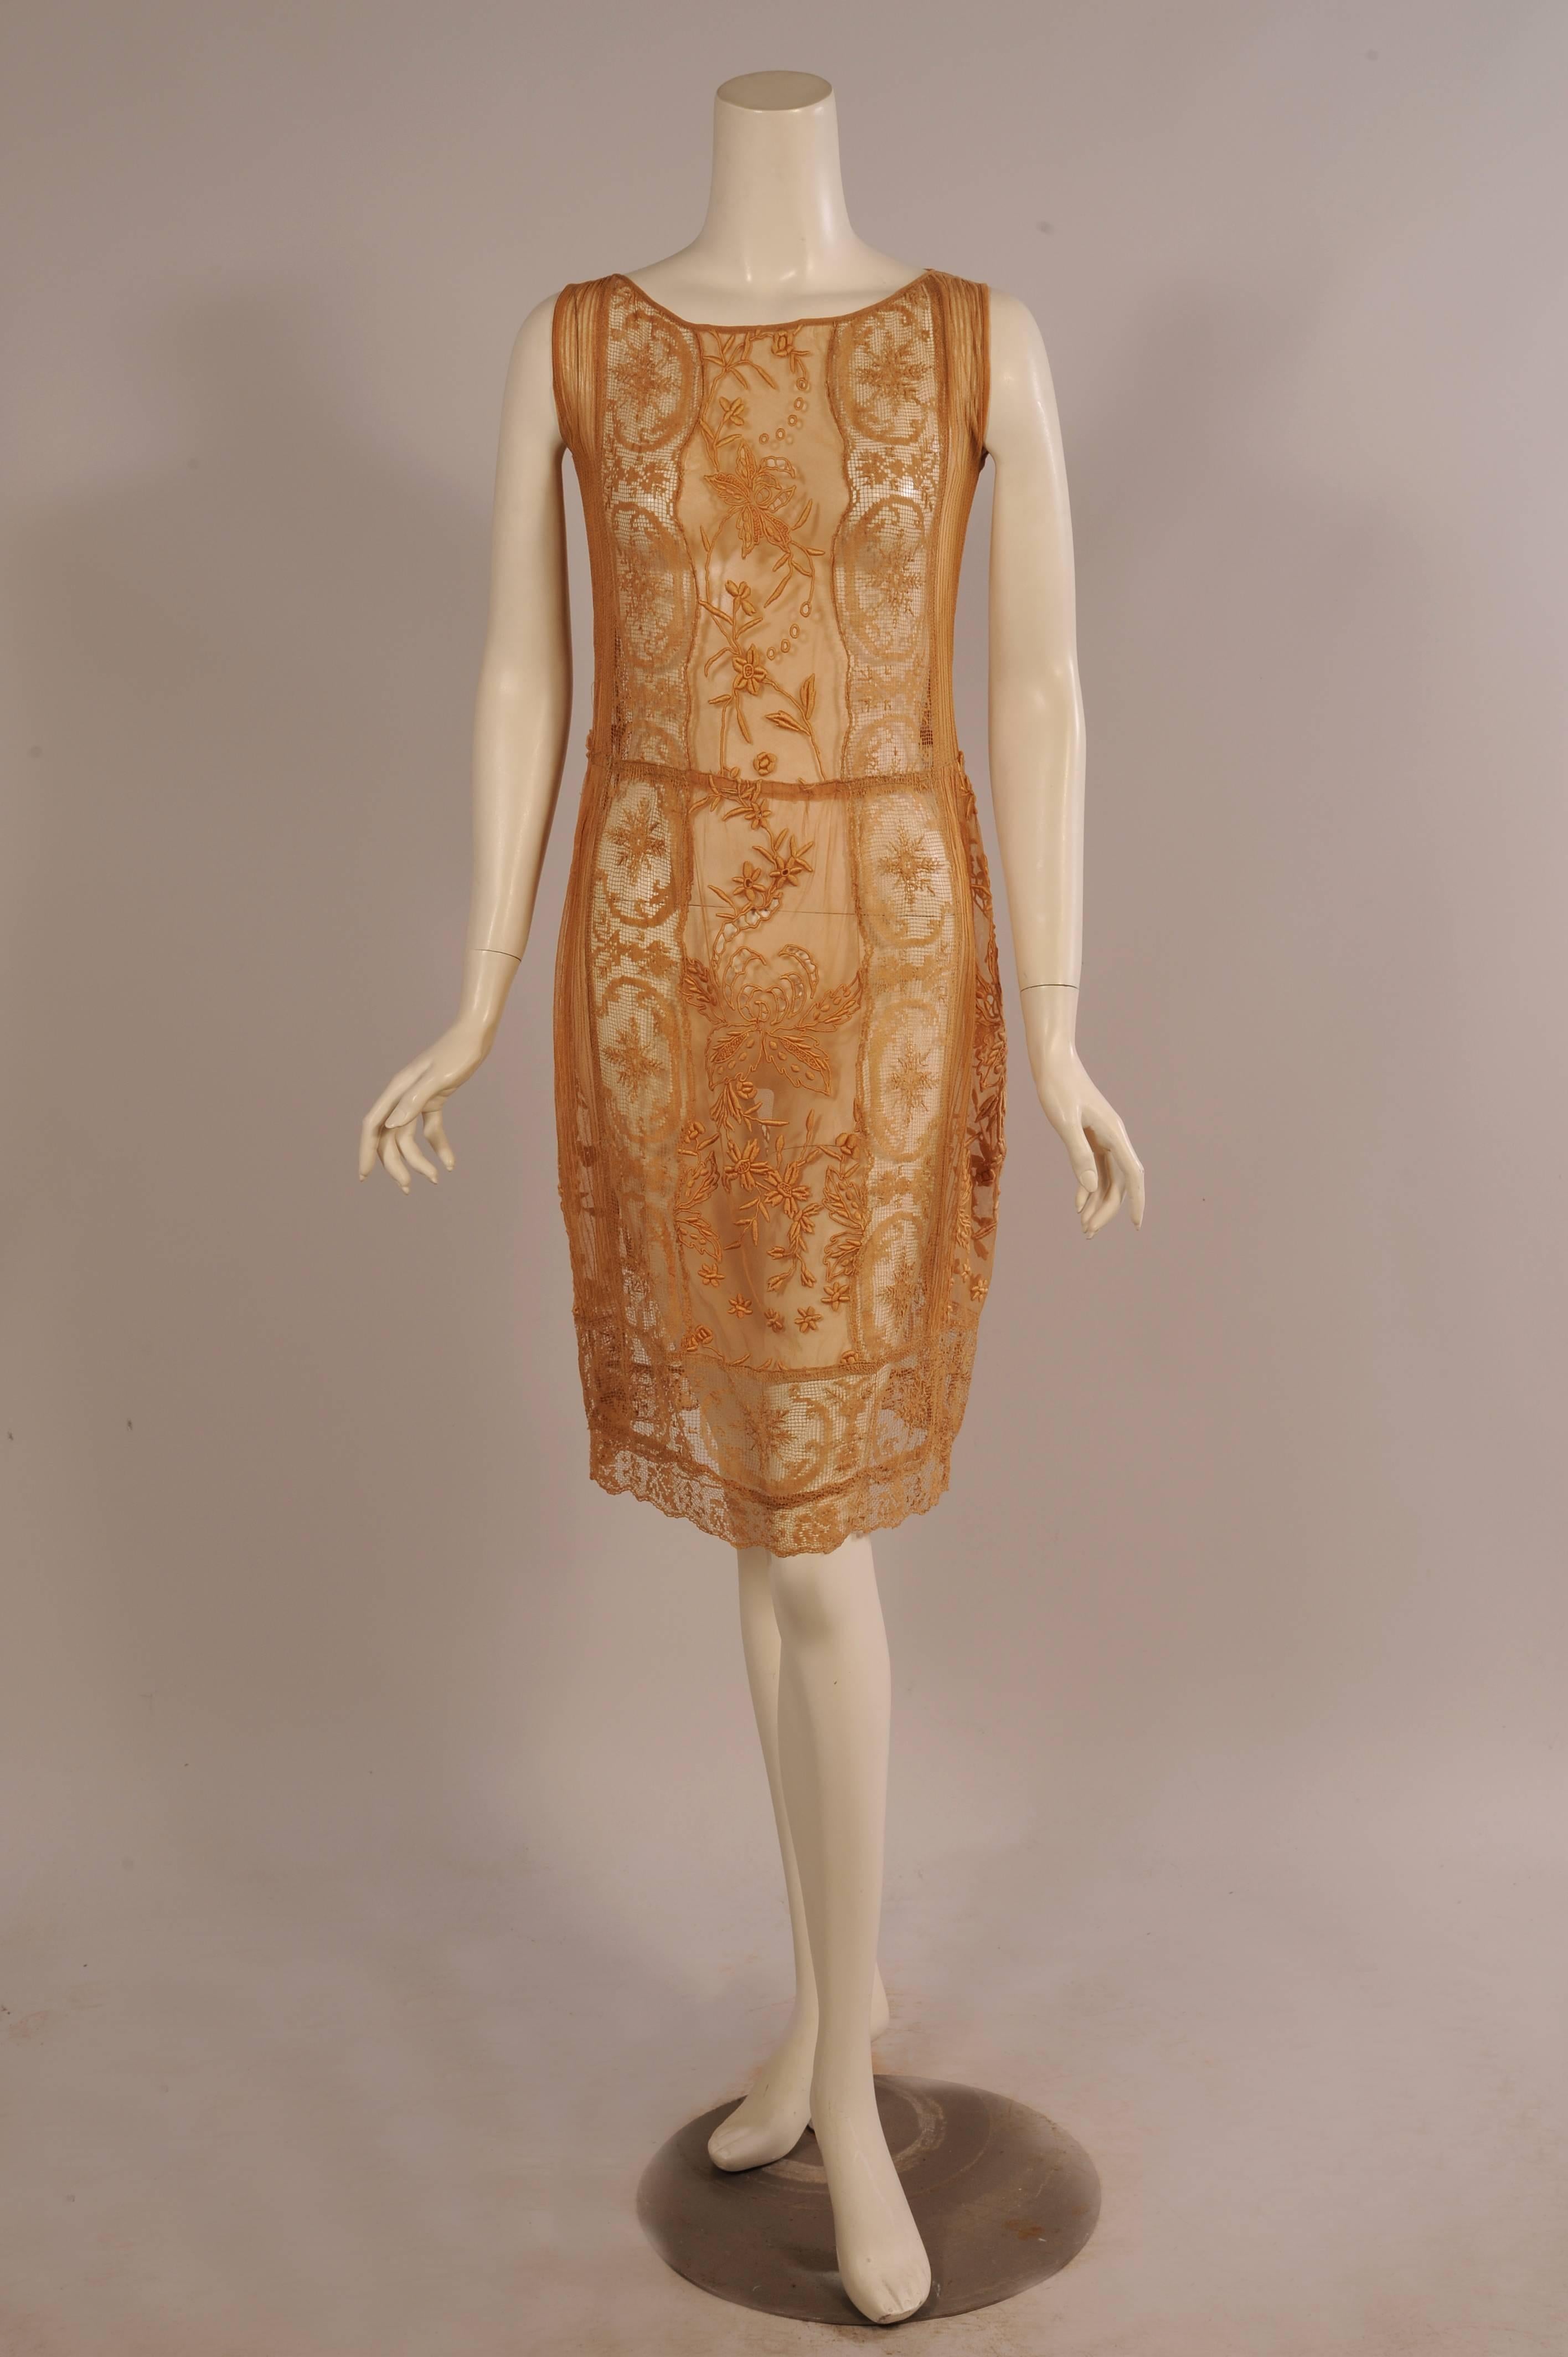 Hand embroidered panels, embroidered filet lace panels and pin tucked tulle panels are combined to make this lovely 1920's dress. The panels are sewn in a vertical design and they are finished with a horizontal panel at the hemline. This dress can